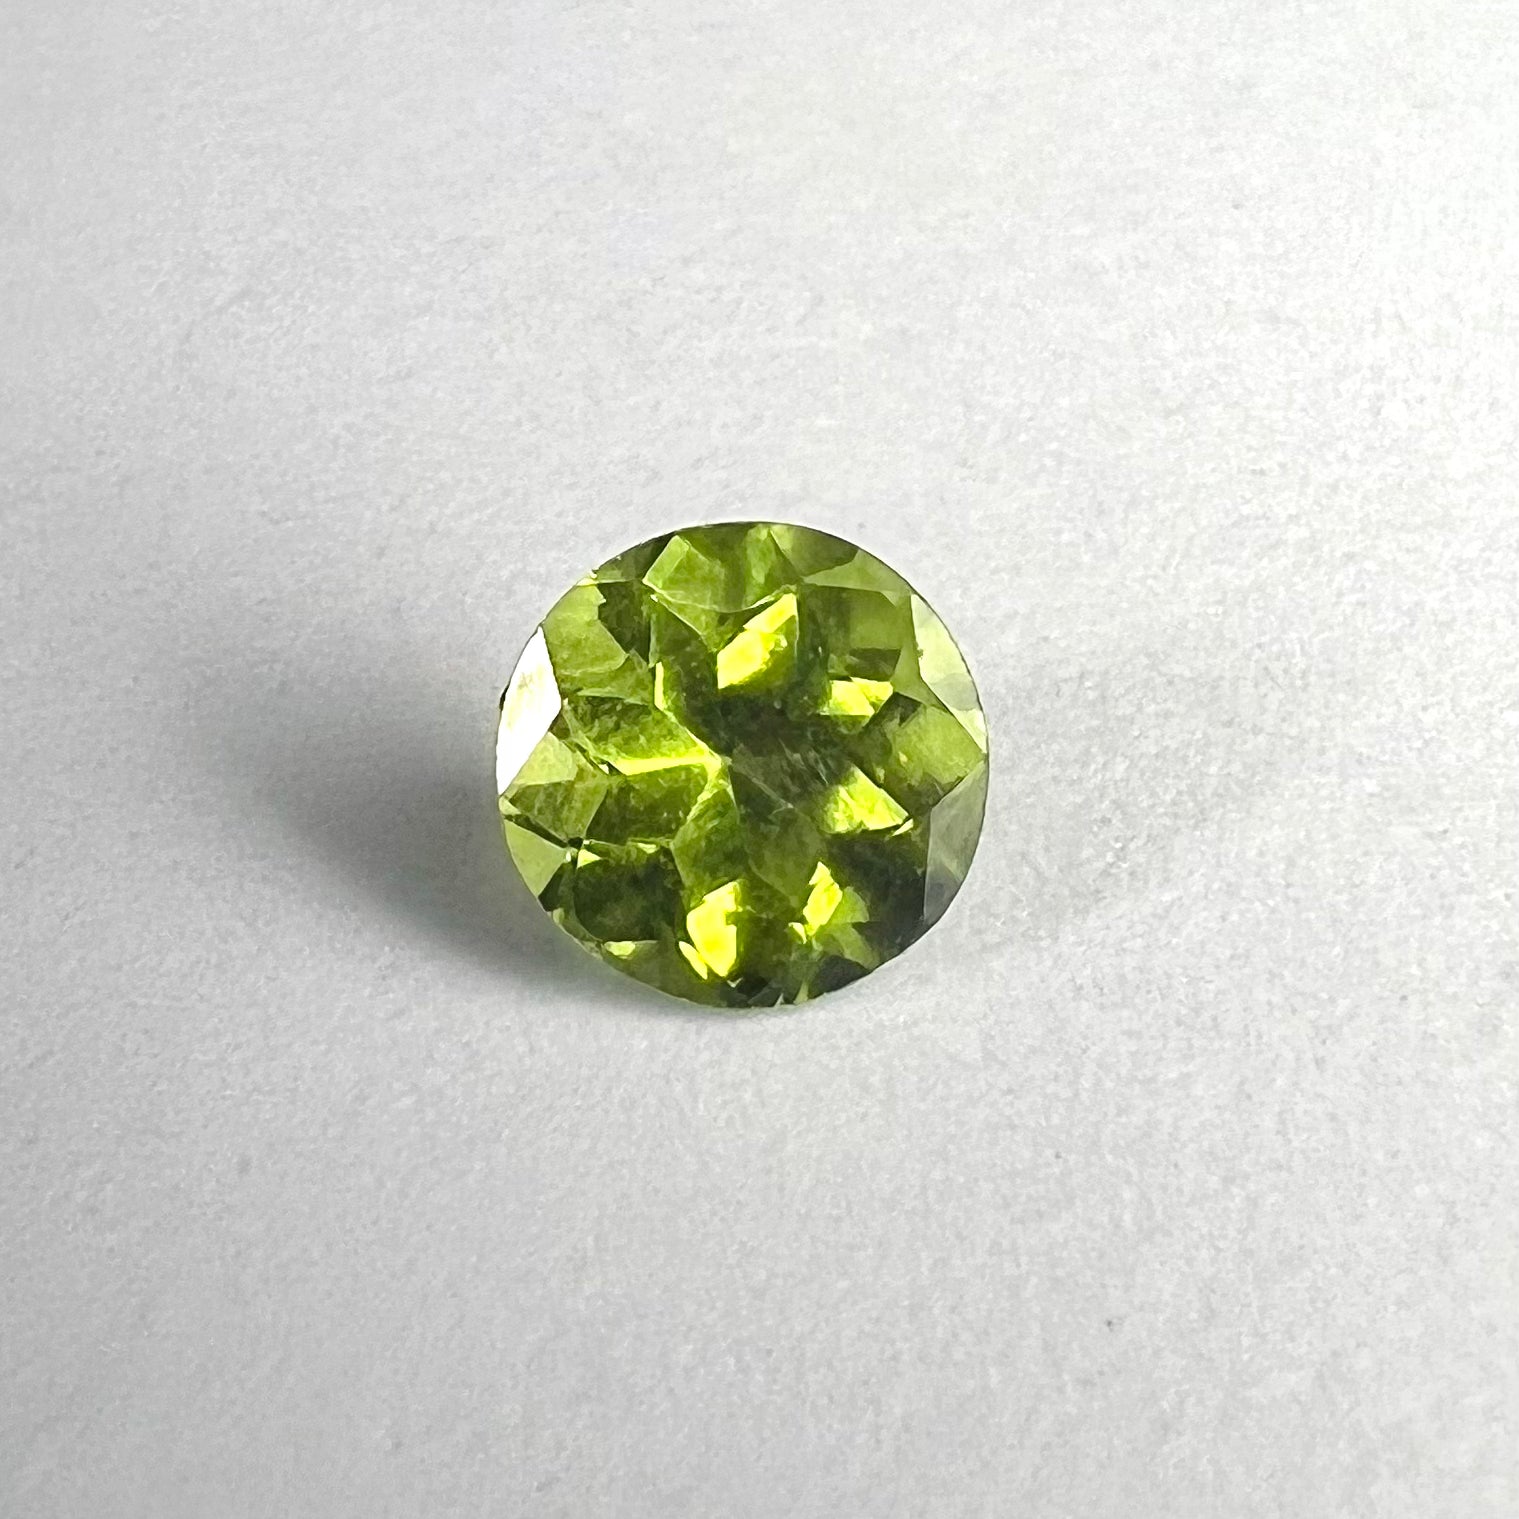 1.34CTW Loose Natural Round Peridot 6.80x4.36mm Earth mined Gemstone